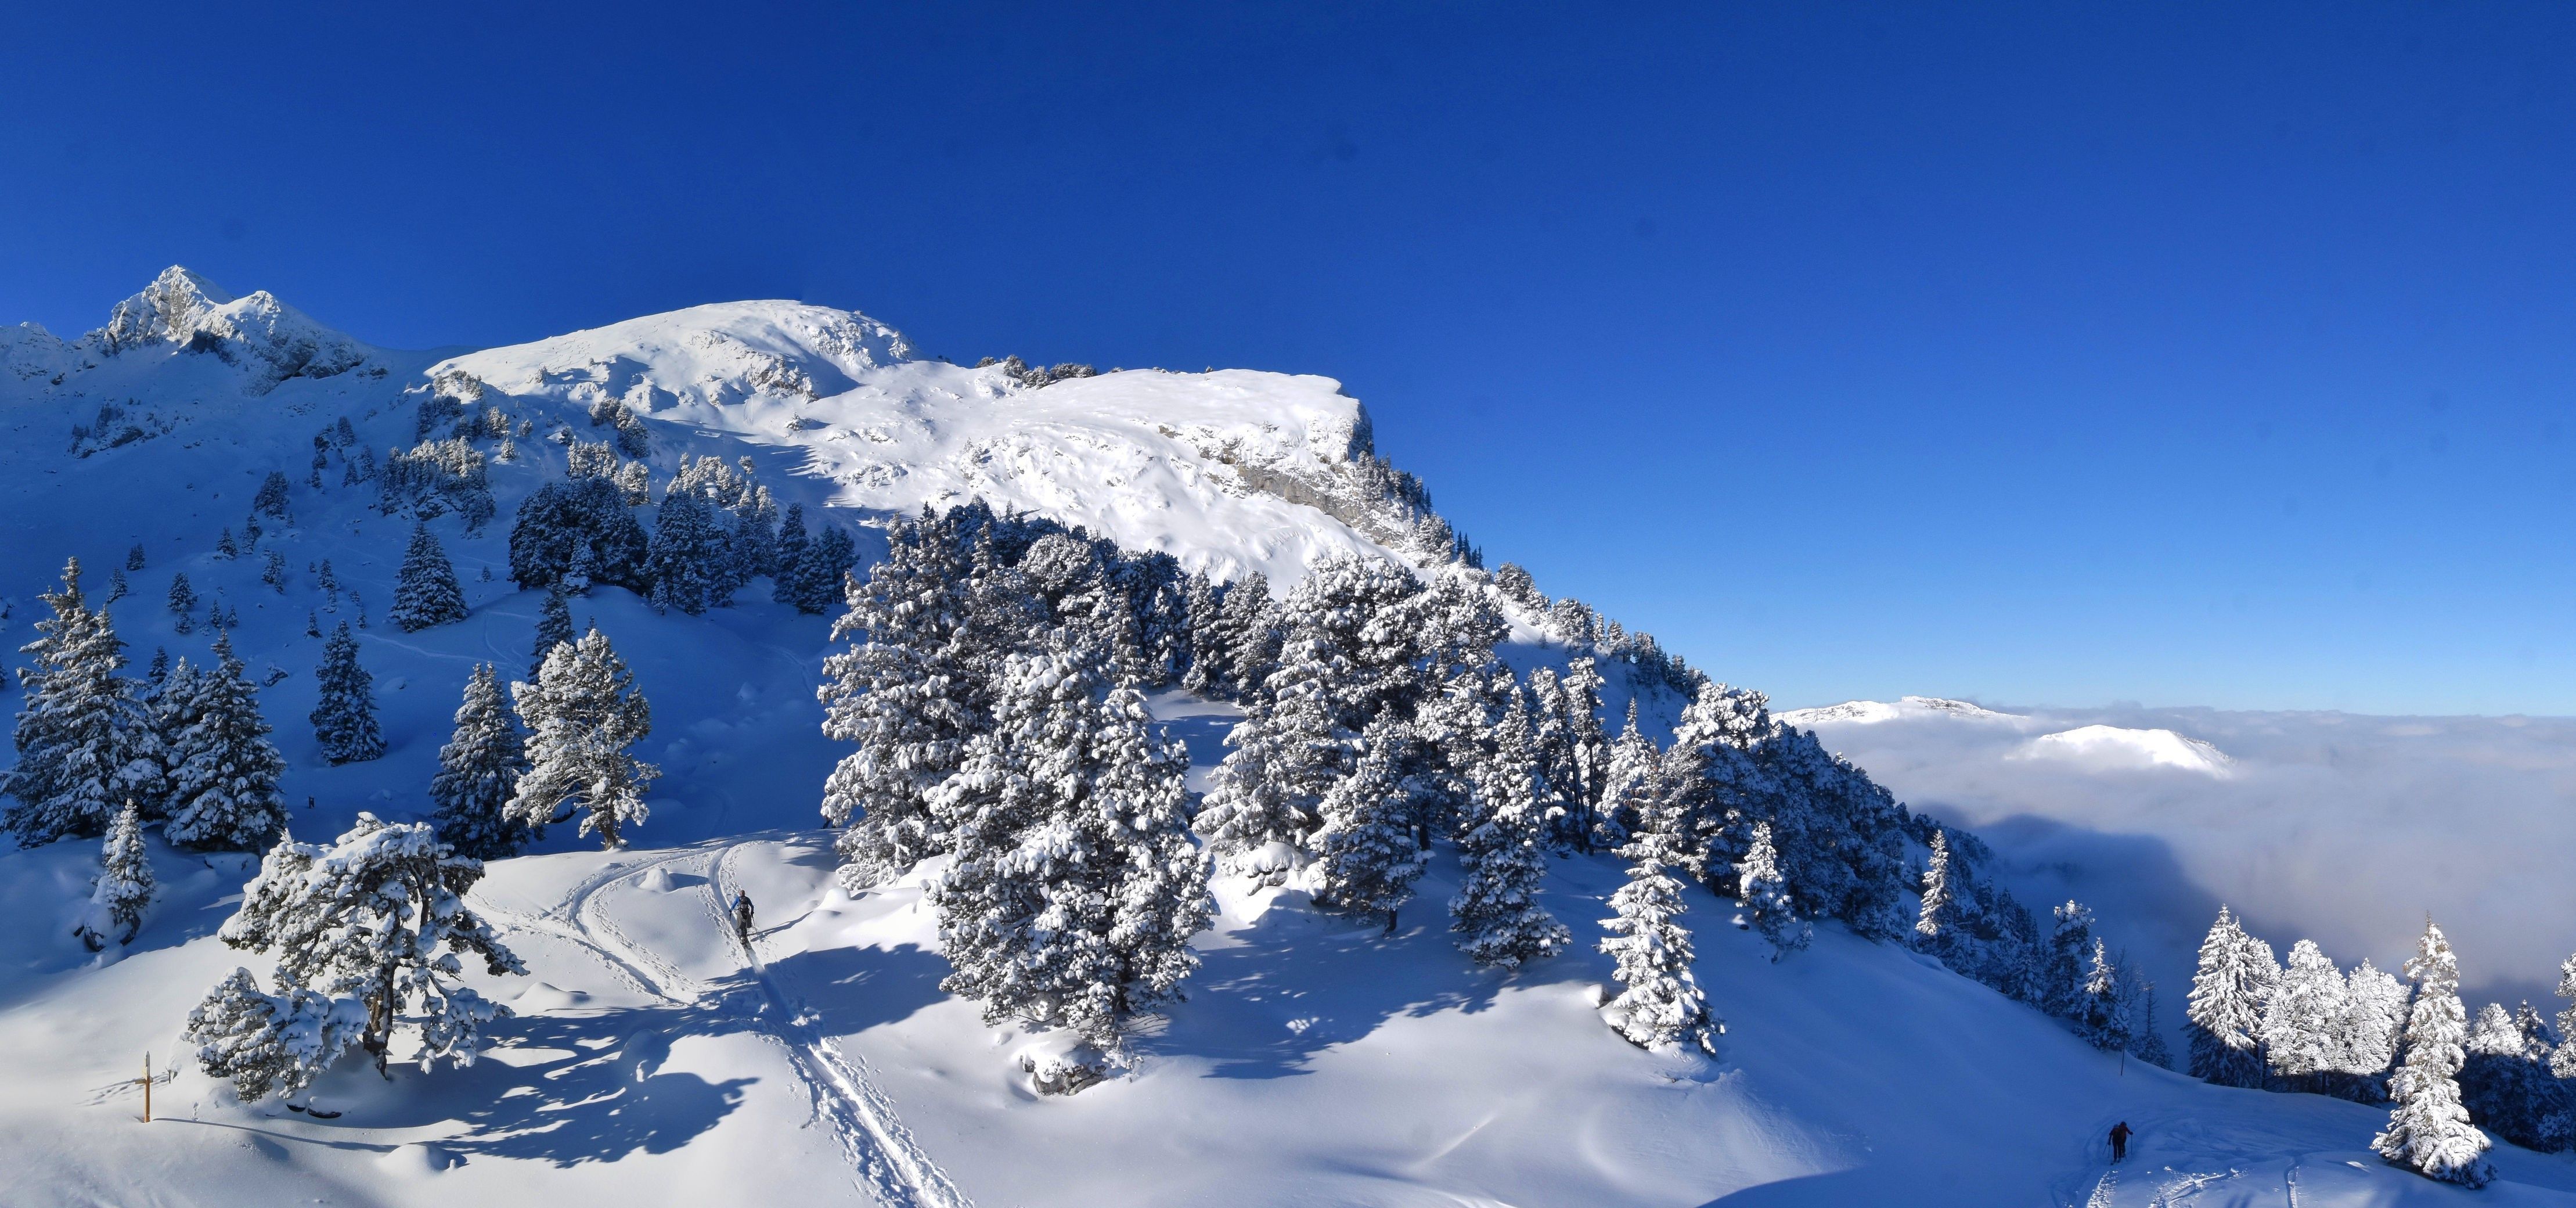 Perfect ski touring conditions yesterday after the snowfall in France, like here in La Sambuy